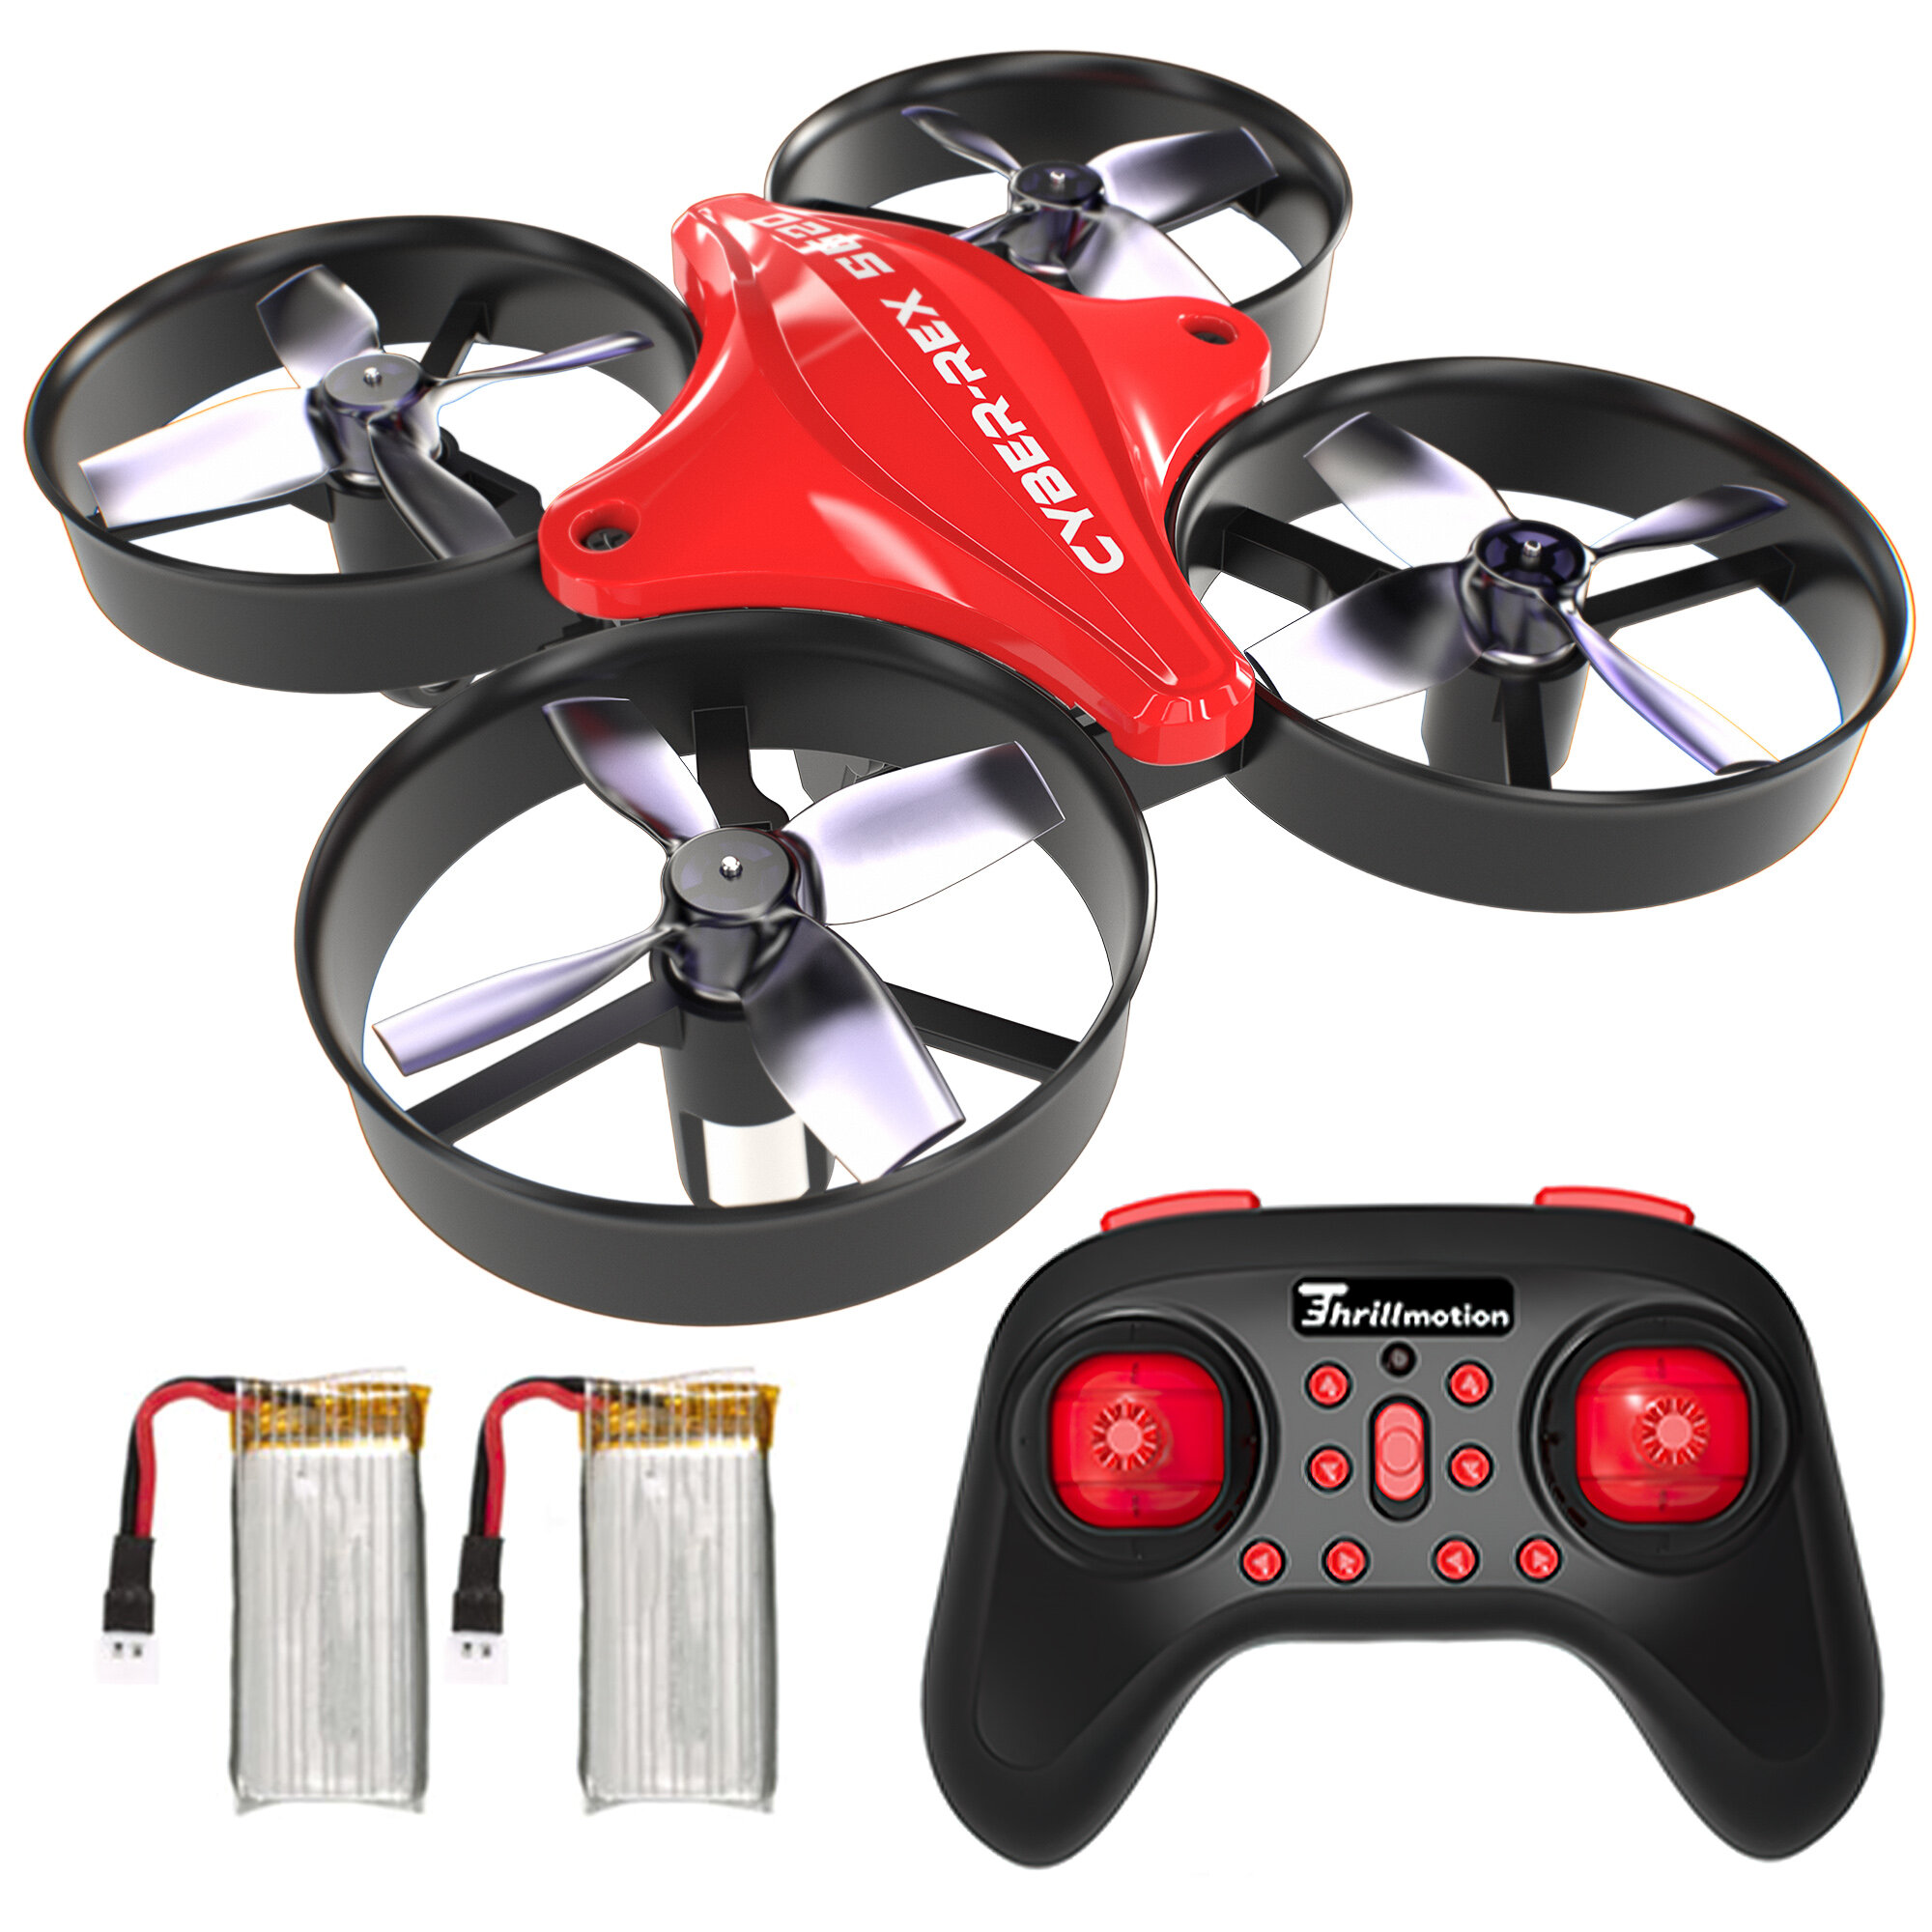 best price,emax,thrill,motion,cyber,rex,s620,drone,rtf,batteries,discount